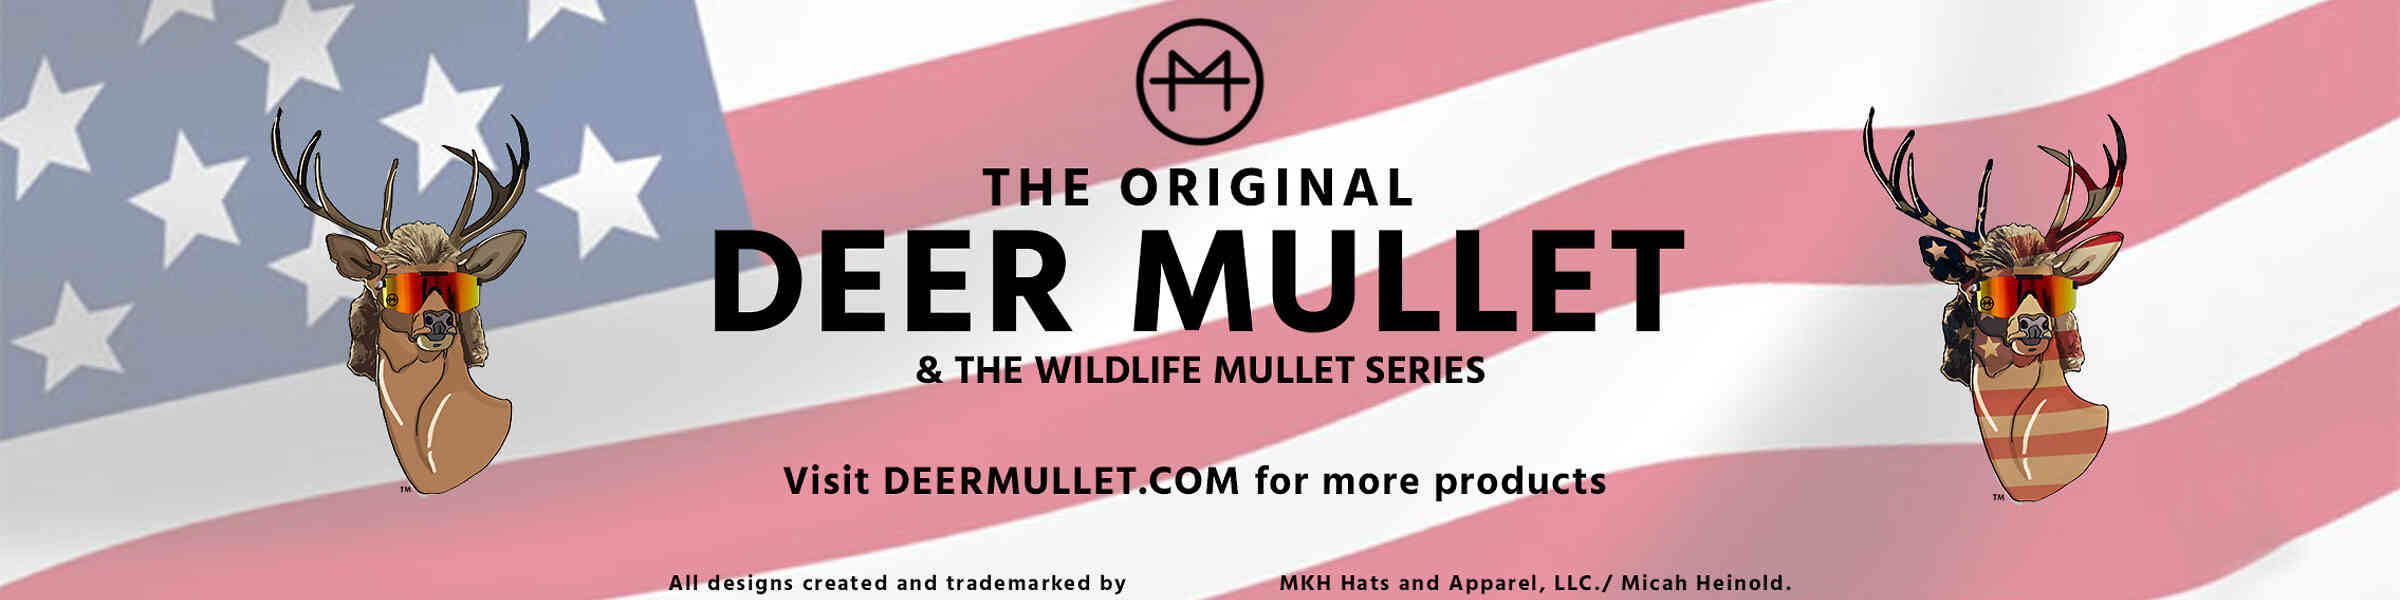 Stream deer mullet 12 music  Listen to songs albums playlists for free  on SoundCloud